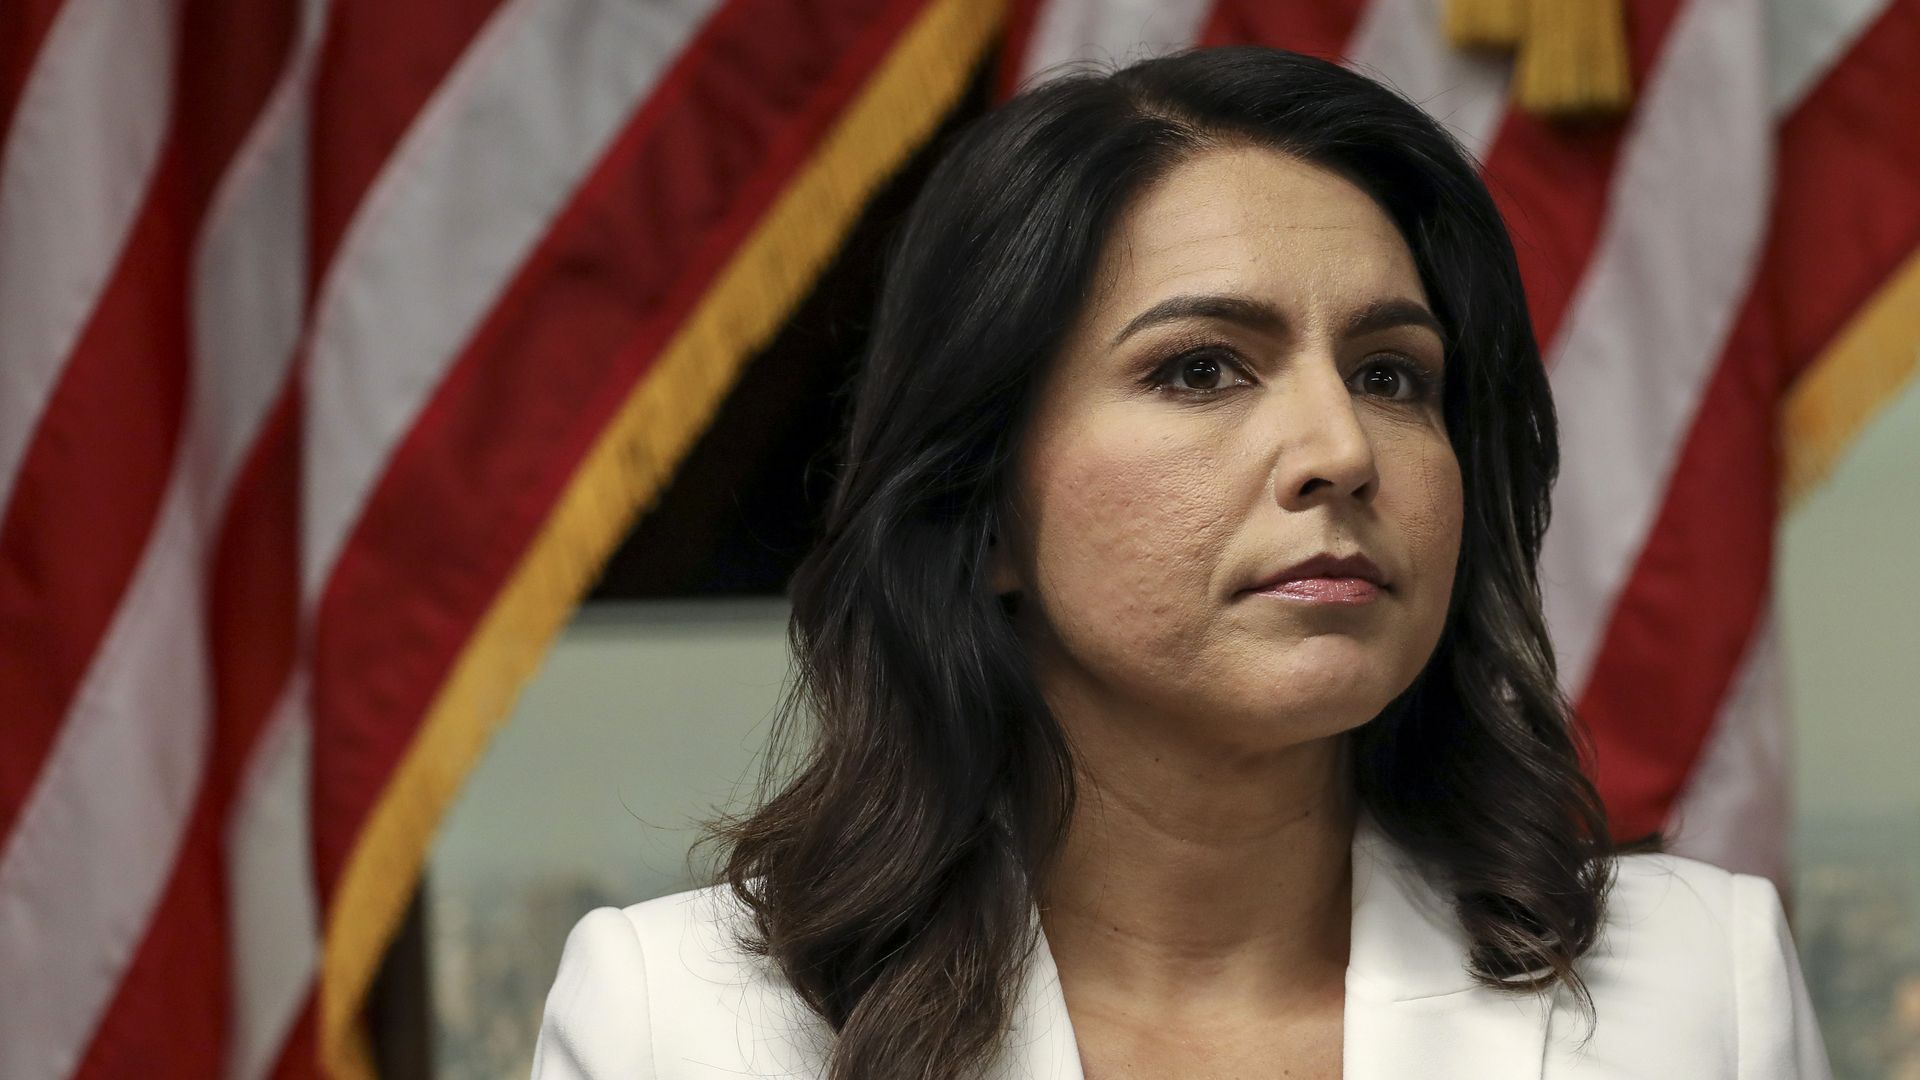 Tulsi Gabbard spent $678,790 on billboards for her 2020 presidential campai...